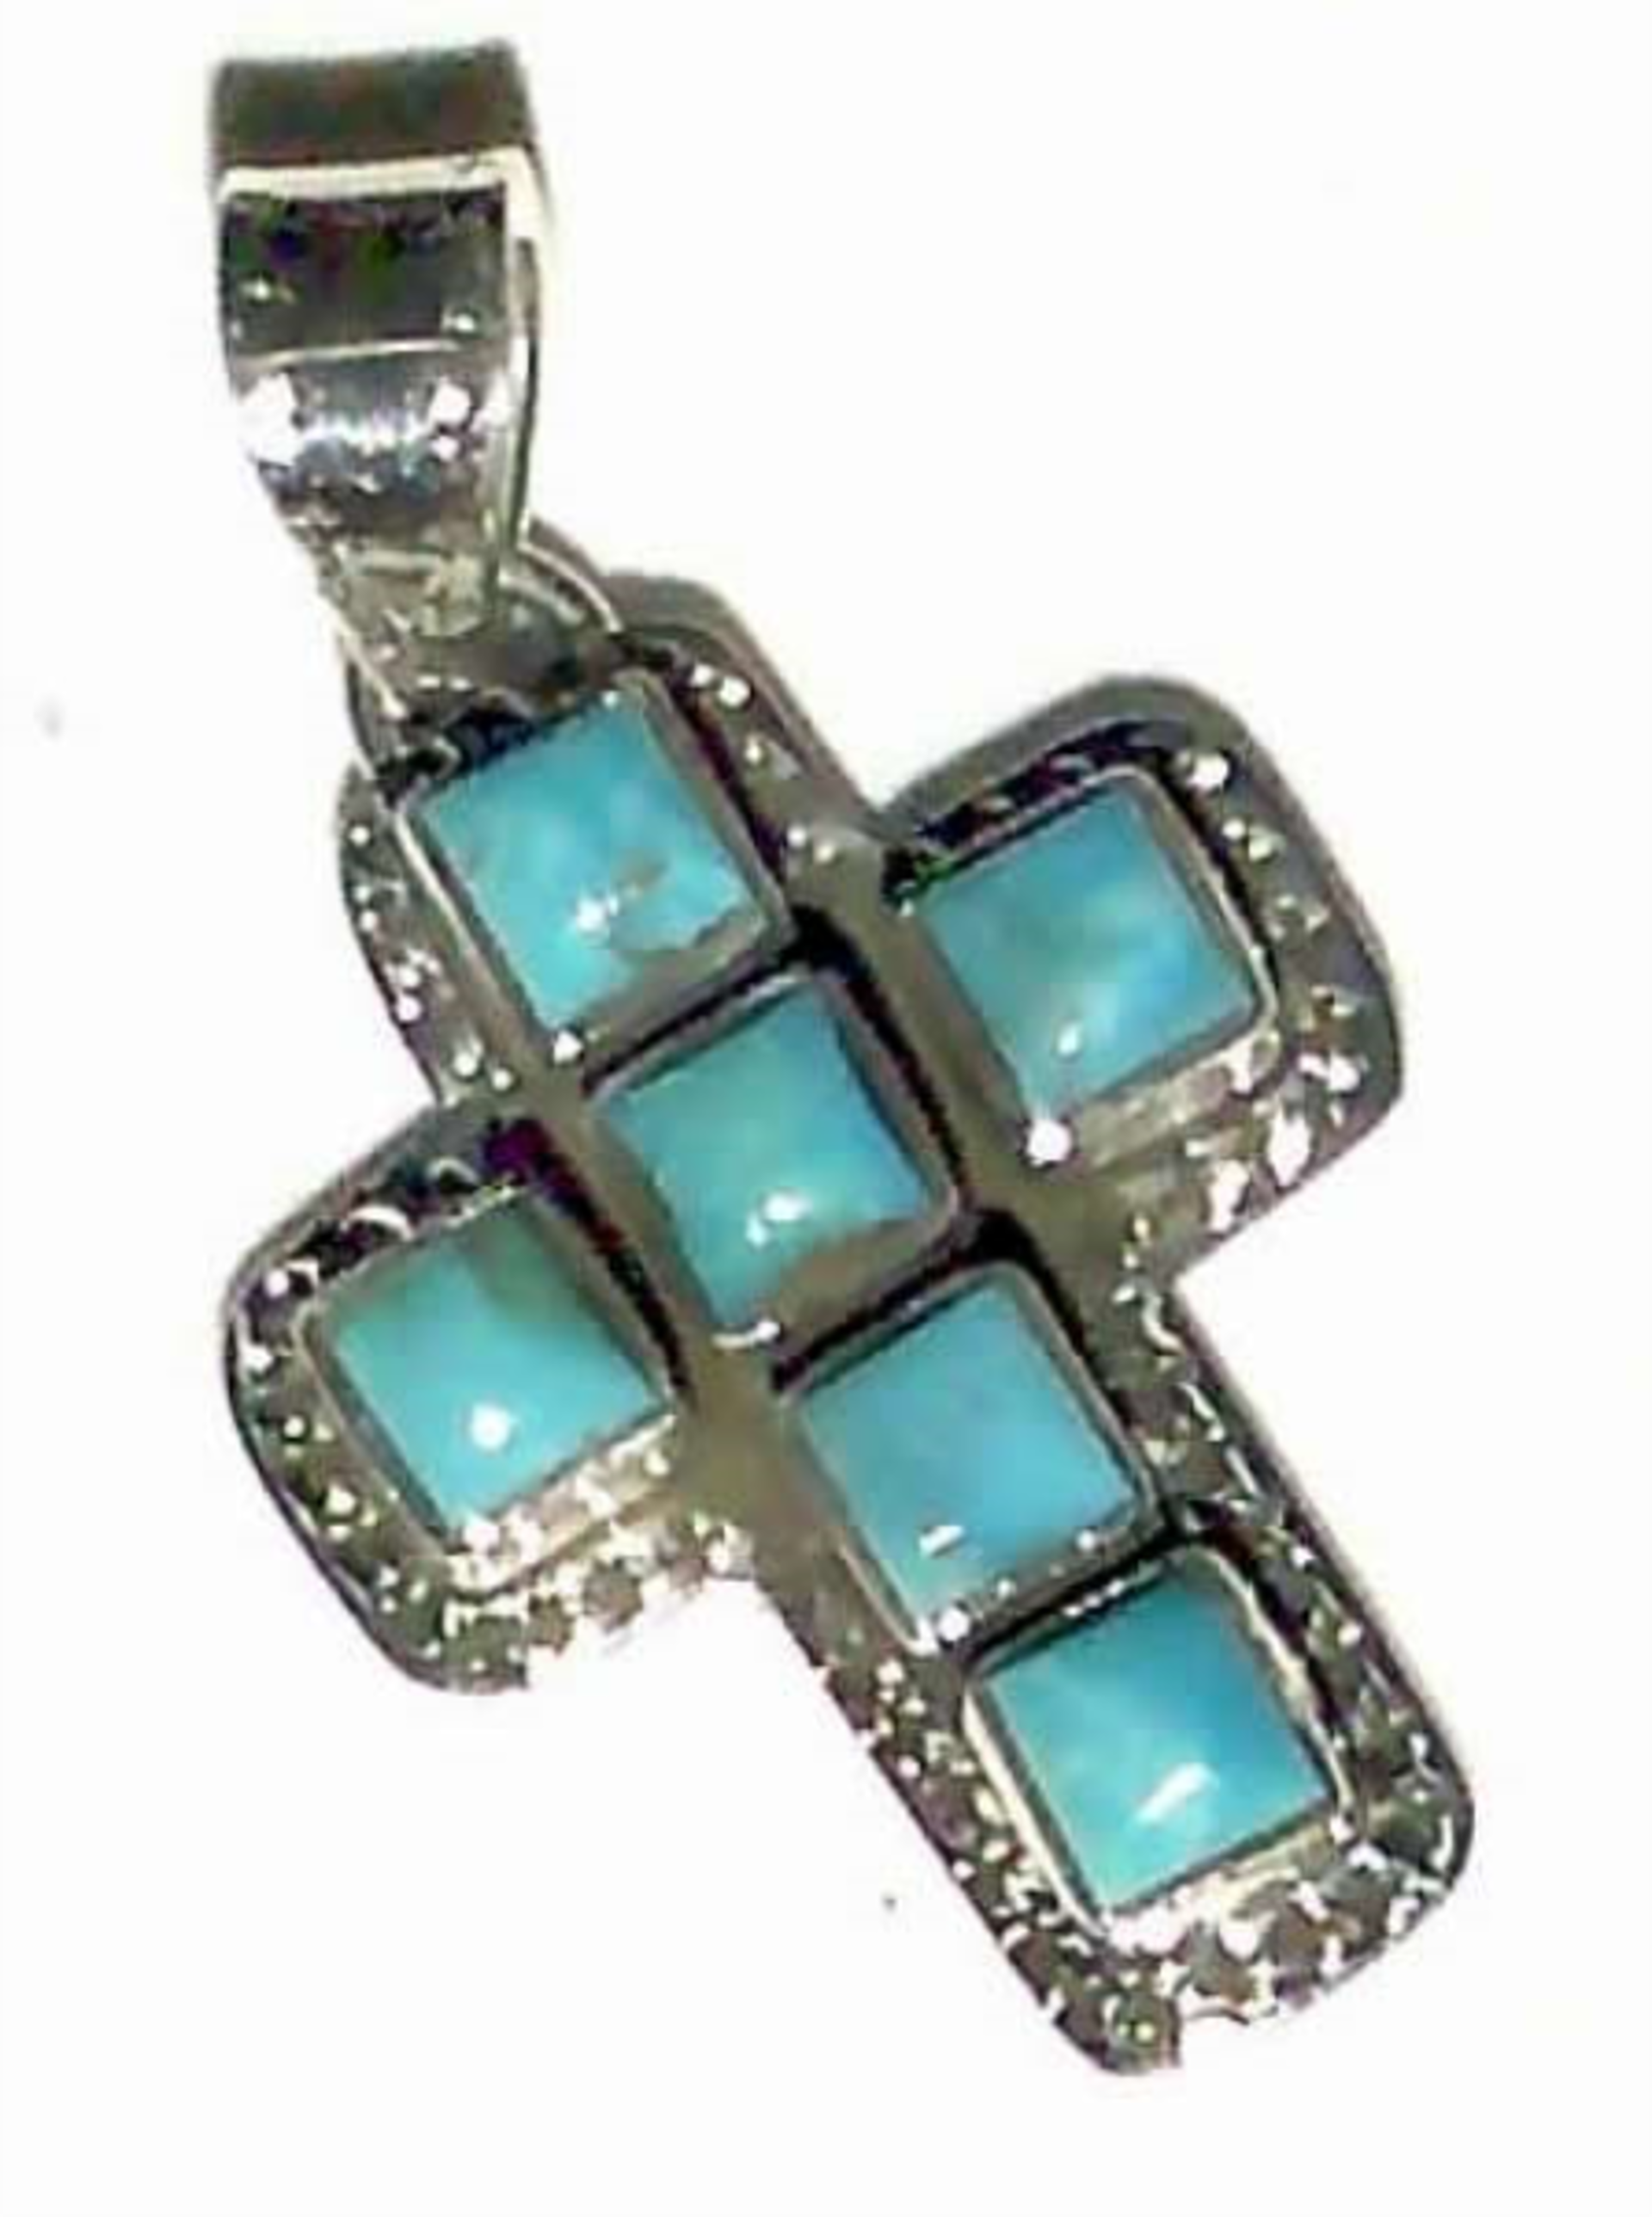 Pendant - Small Turquoise Square Cross by Dan Dodson